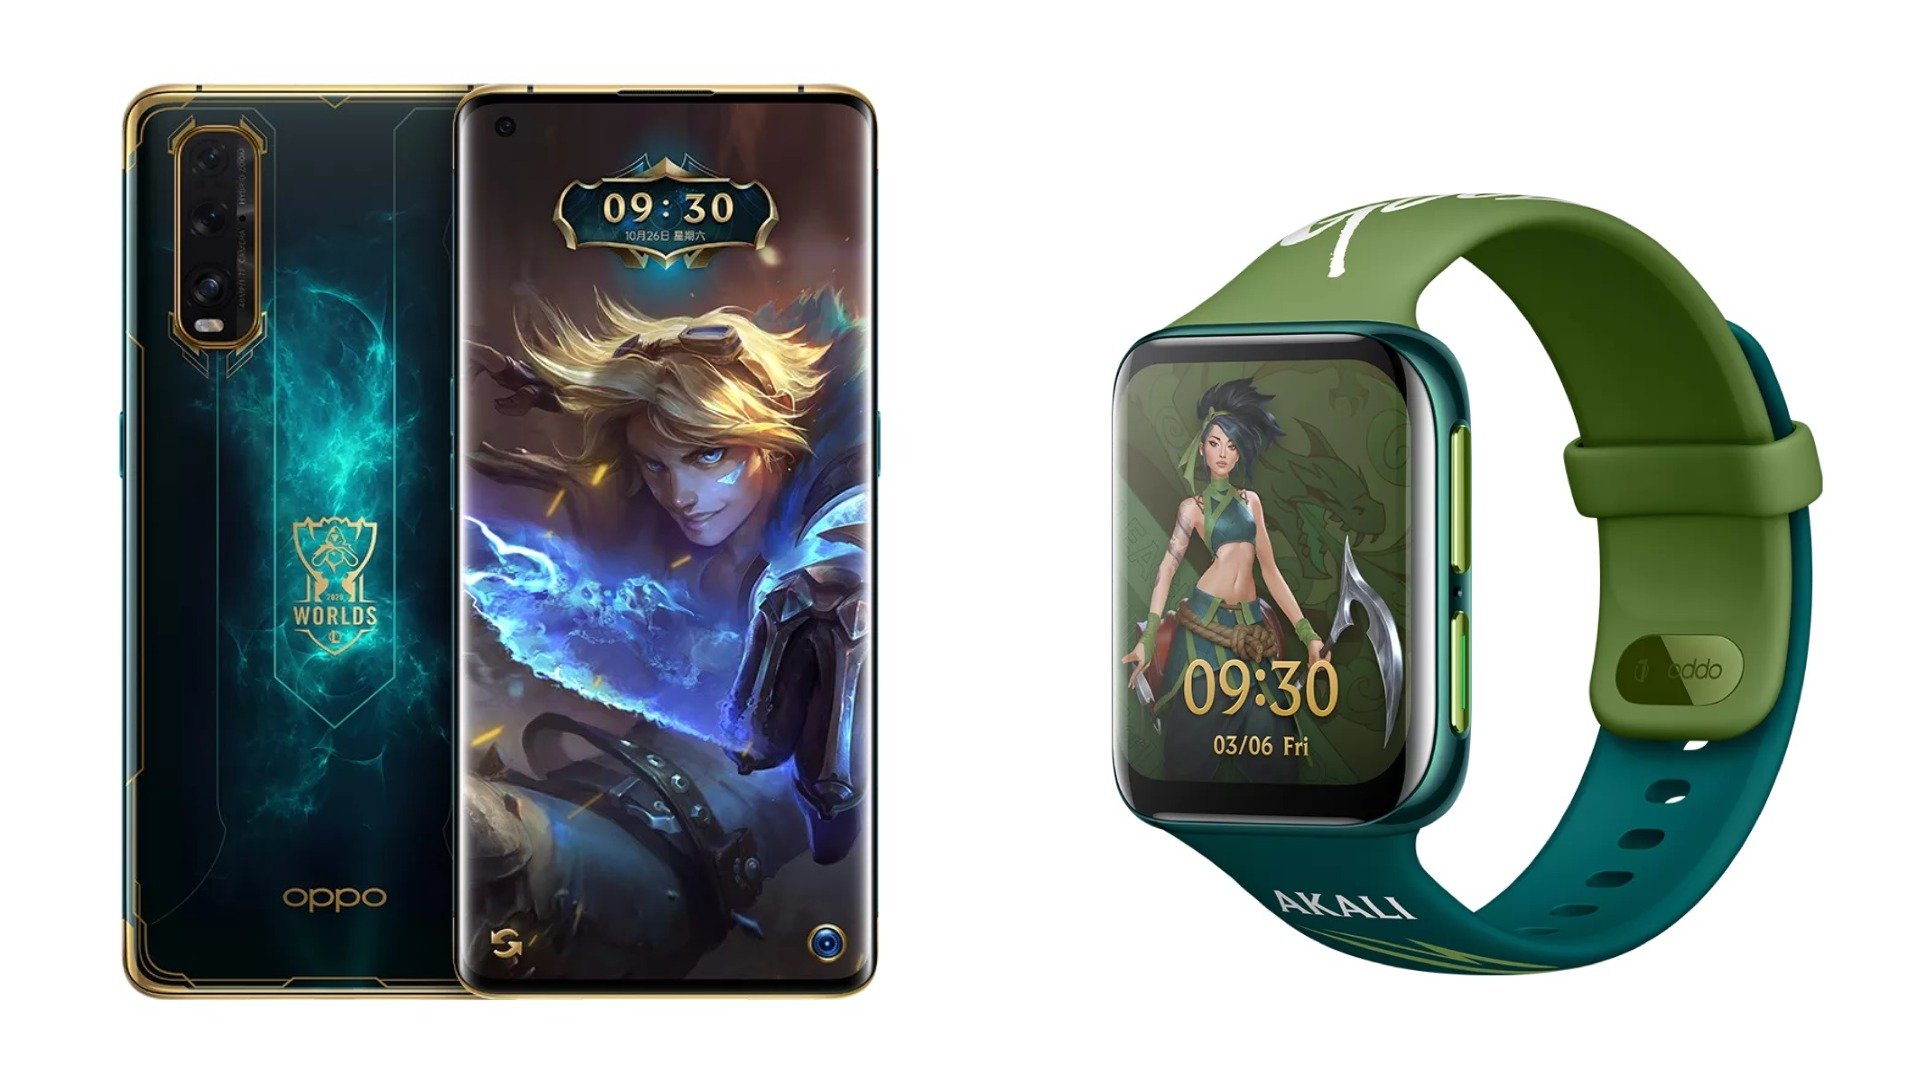 OPPO Find X2 and OPPO Watch League of Legends Limited Editions launched in China